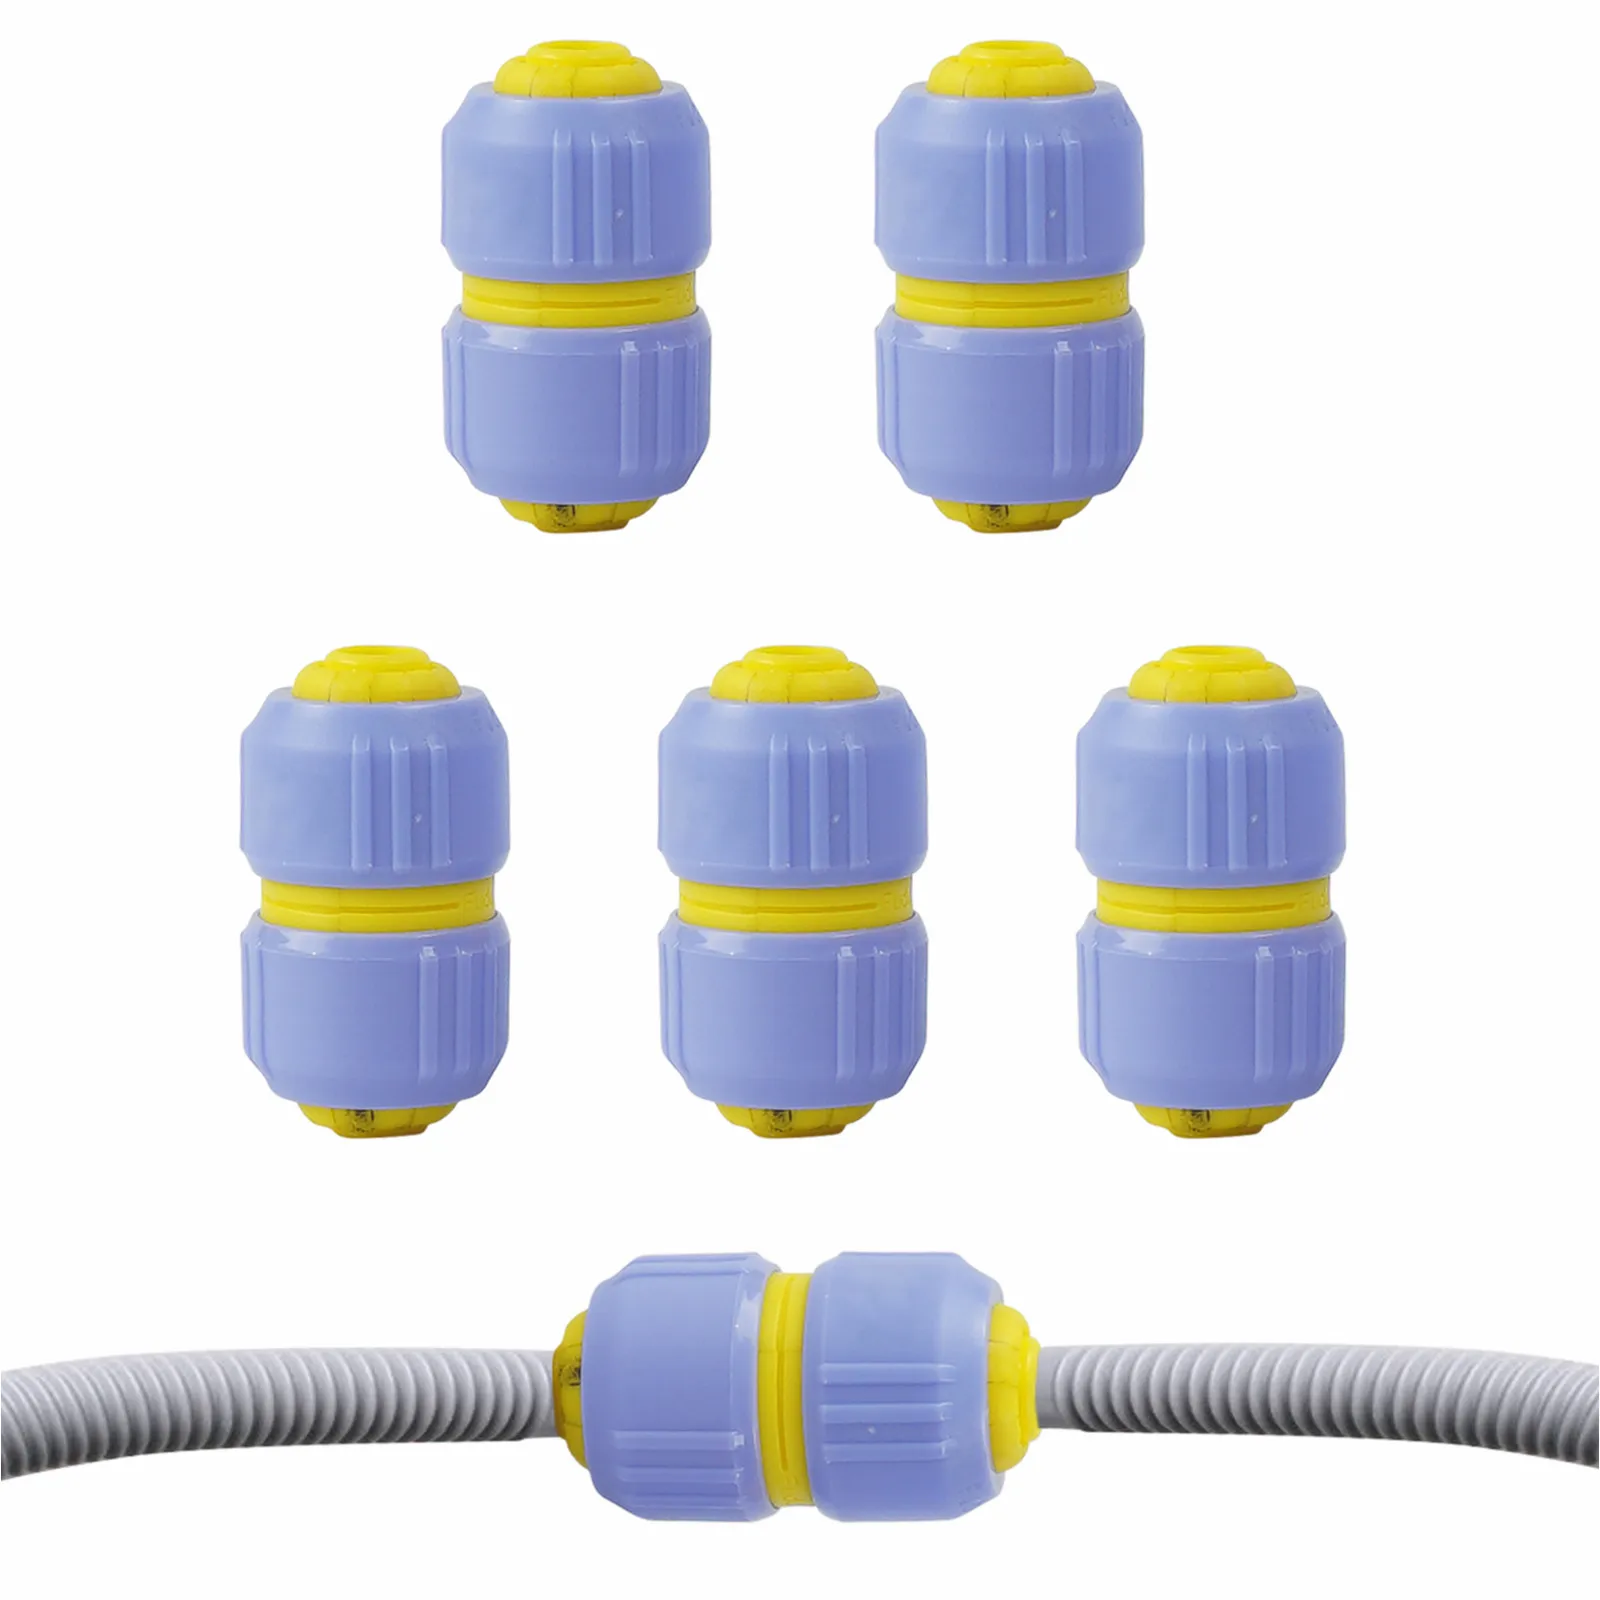 

5 Quick Connector Watering Hose Pipe Tube Adapter Water Tap Splitter Irrigation Agriculture Water Connector Water Control Valve